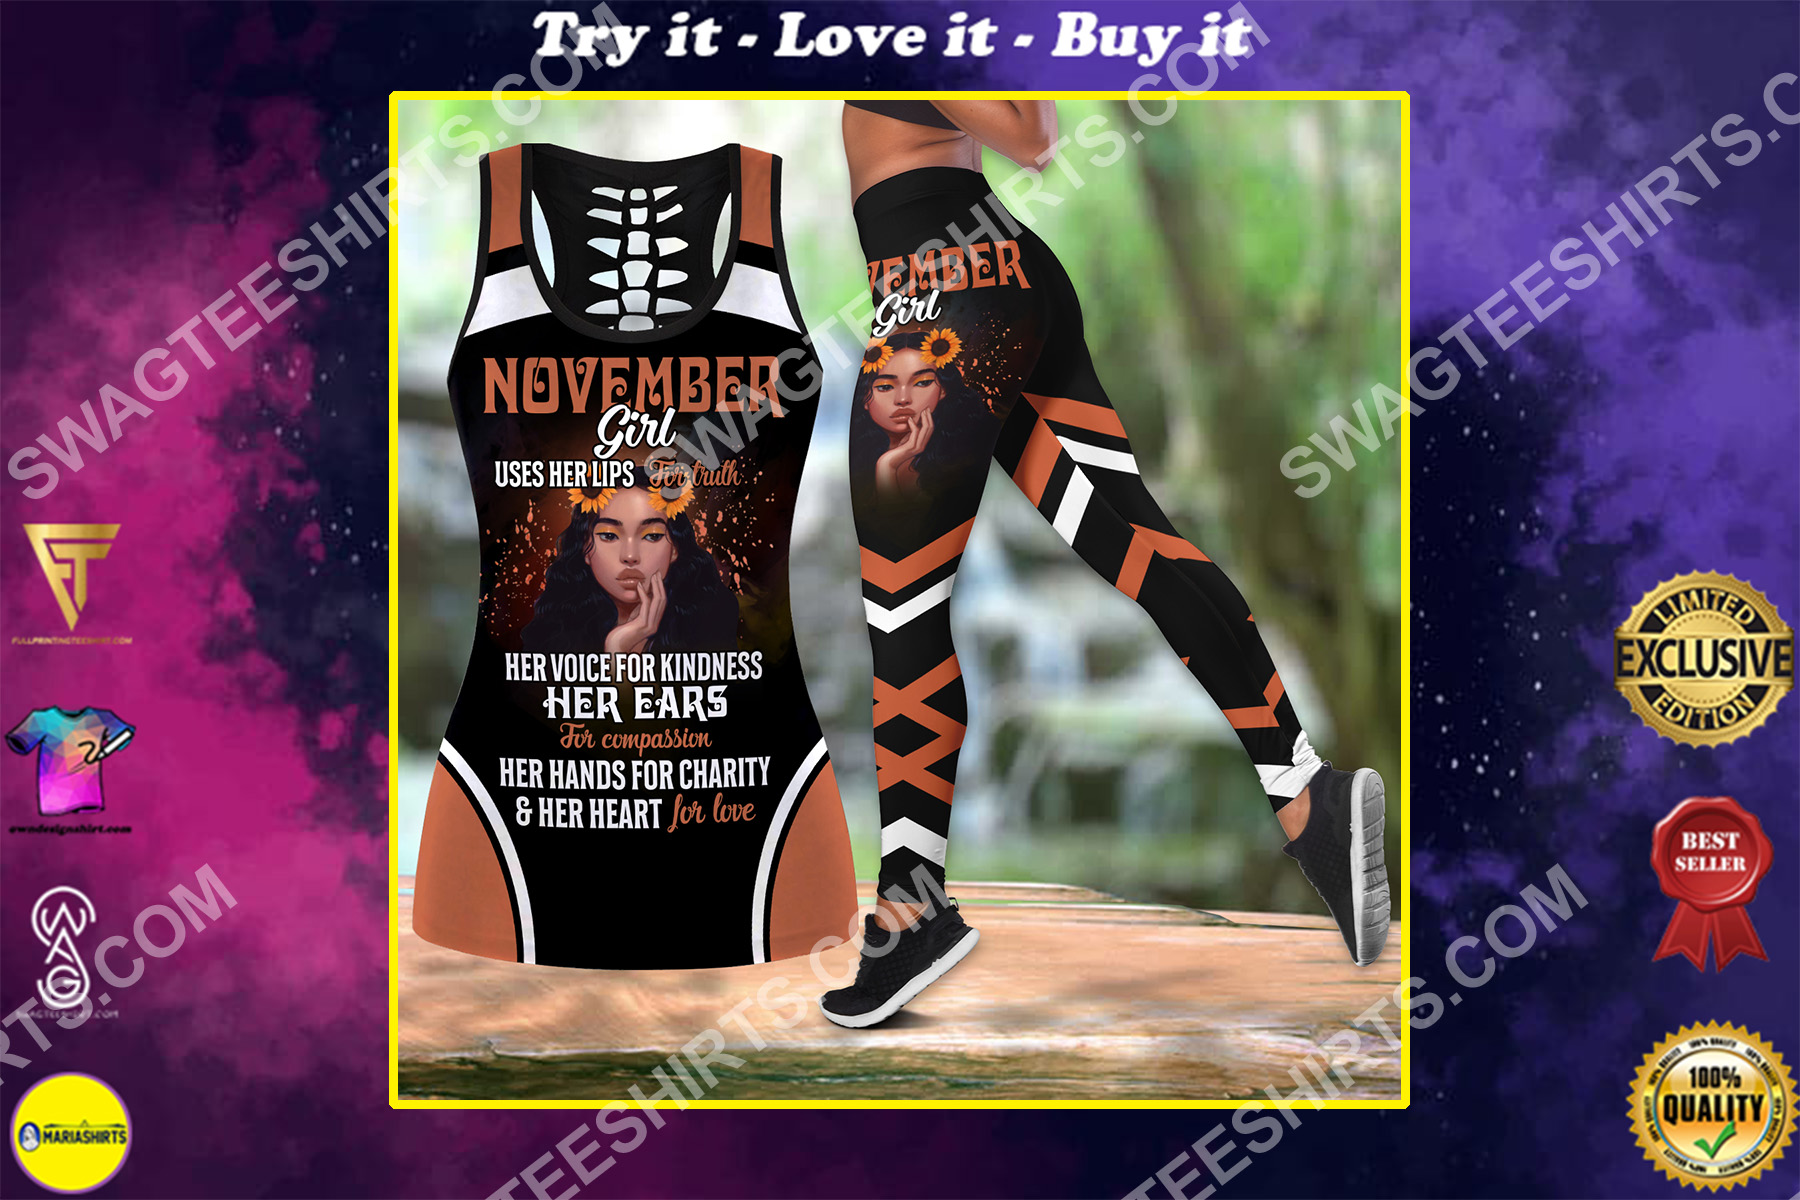 november girl uses her lips for truth birthday gift set sports outfit